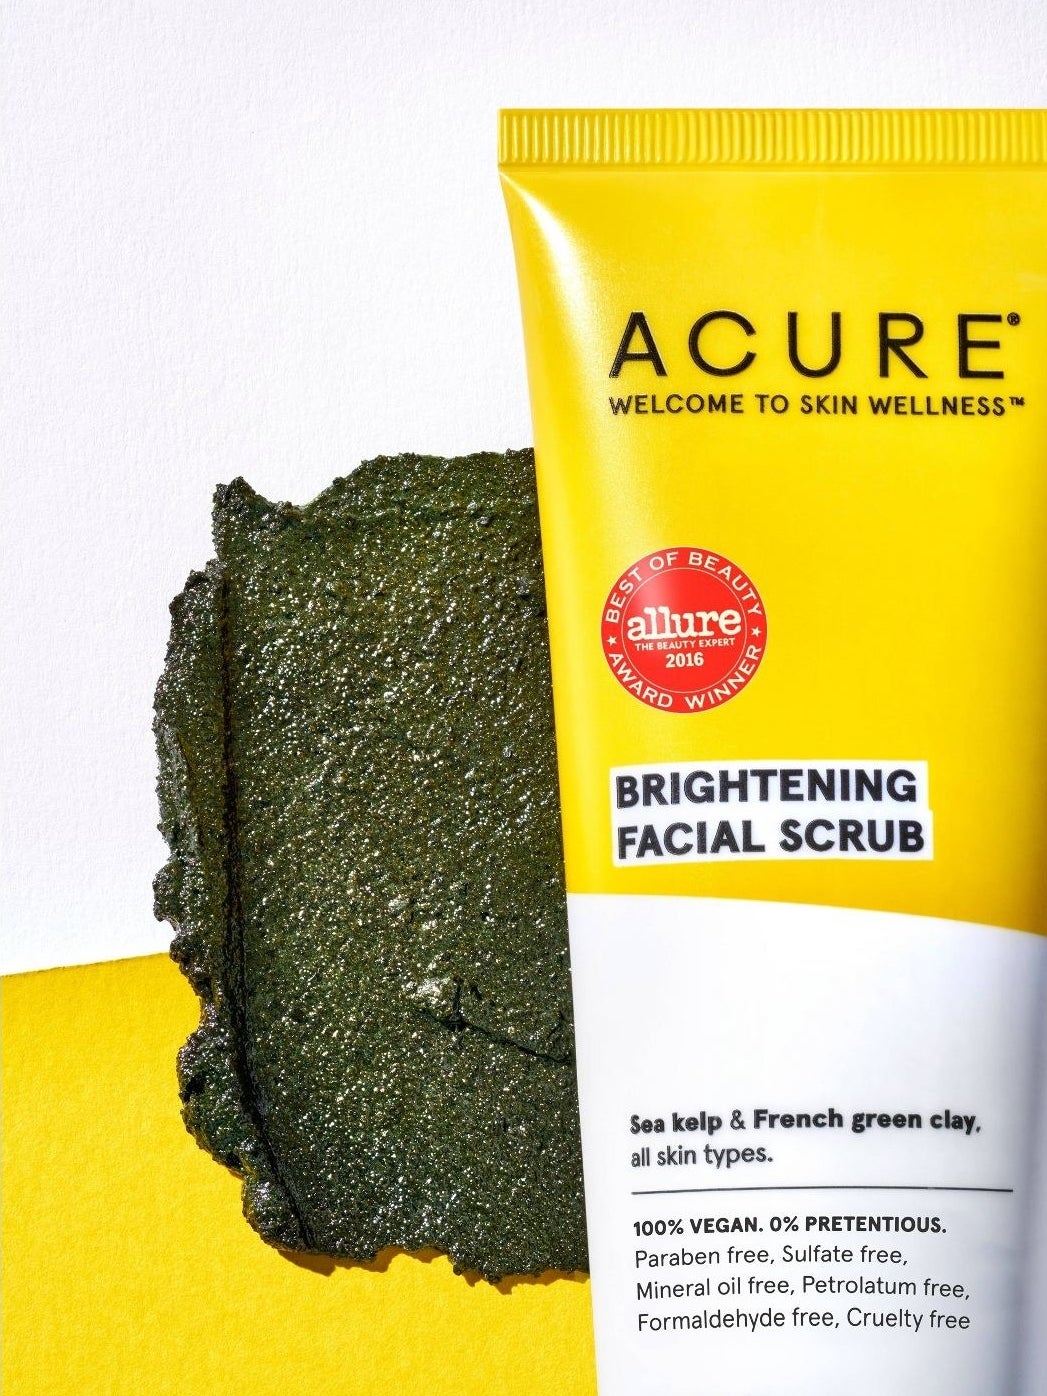 The Acure brightening facial scrub